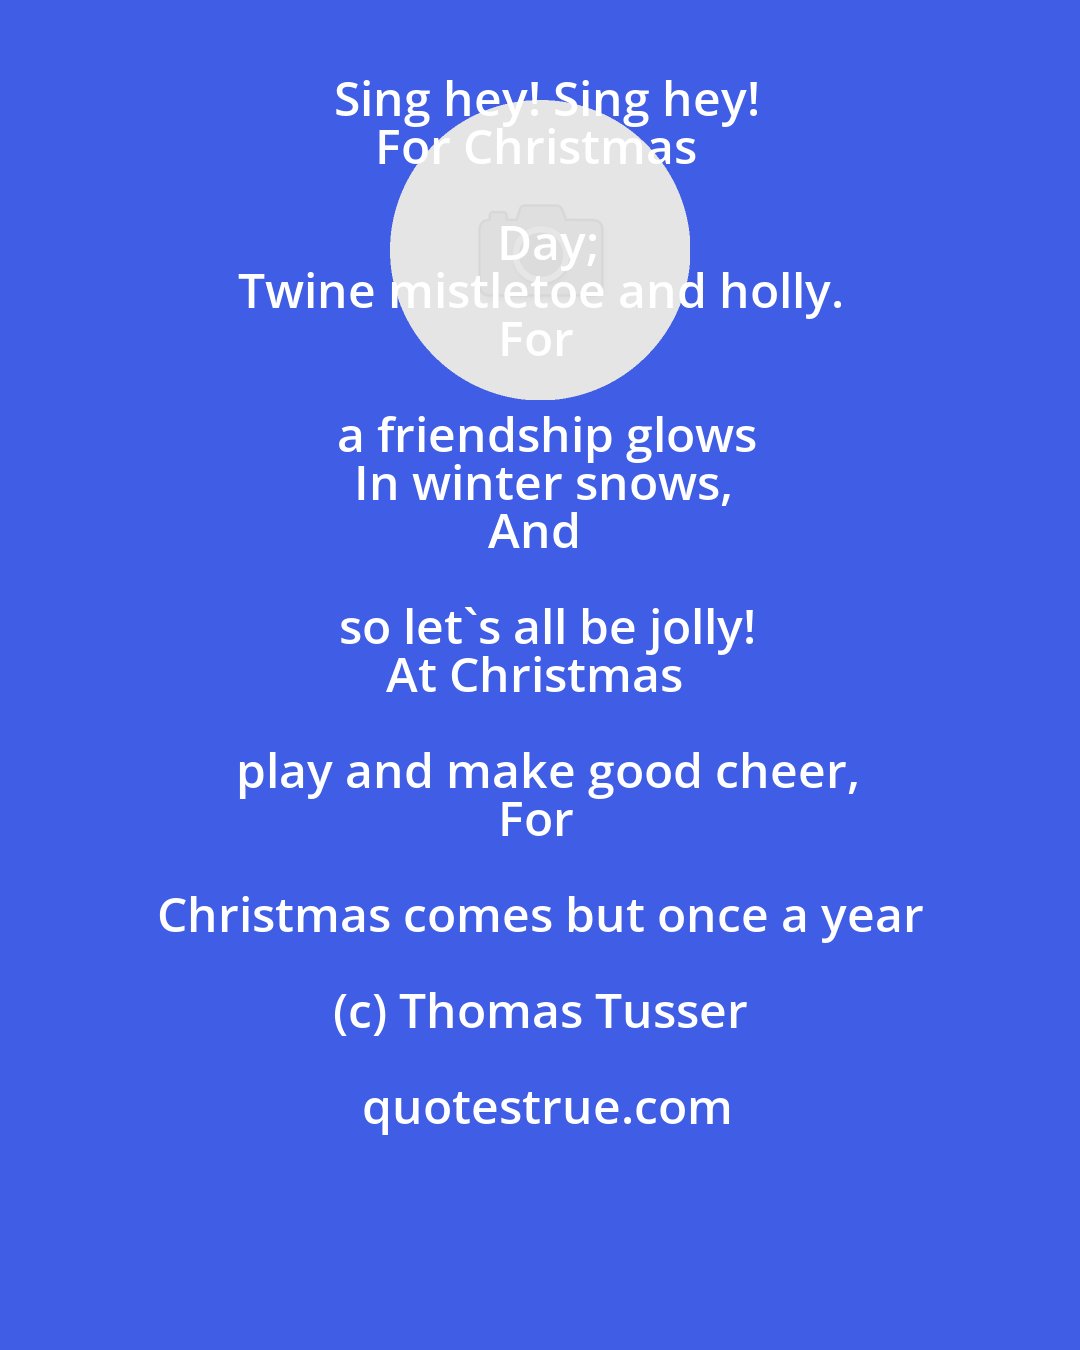 Thomas Tusser: Sing hey! Sing hey!
For Christmas Day;
Twine mistletoe and holly.
For a friendship glows
In winter snows,
And so let's all be jolly!
At Christmas play and make good cheer,
For Christmas comes but once a year